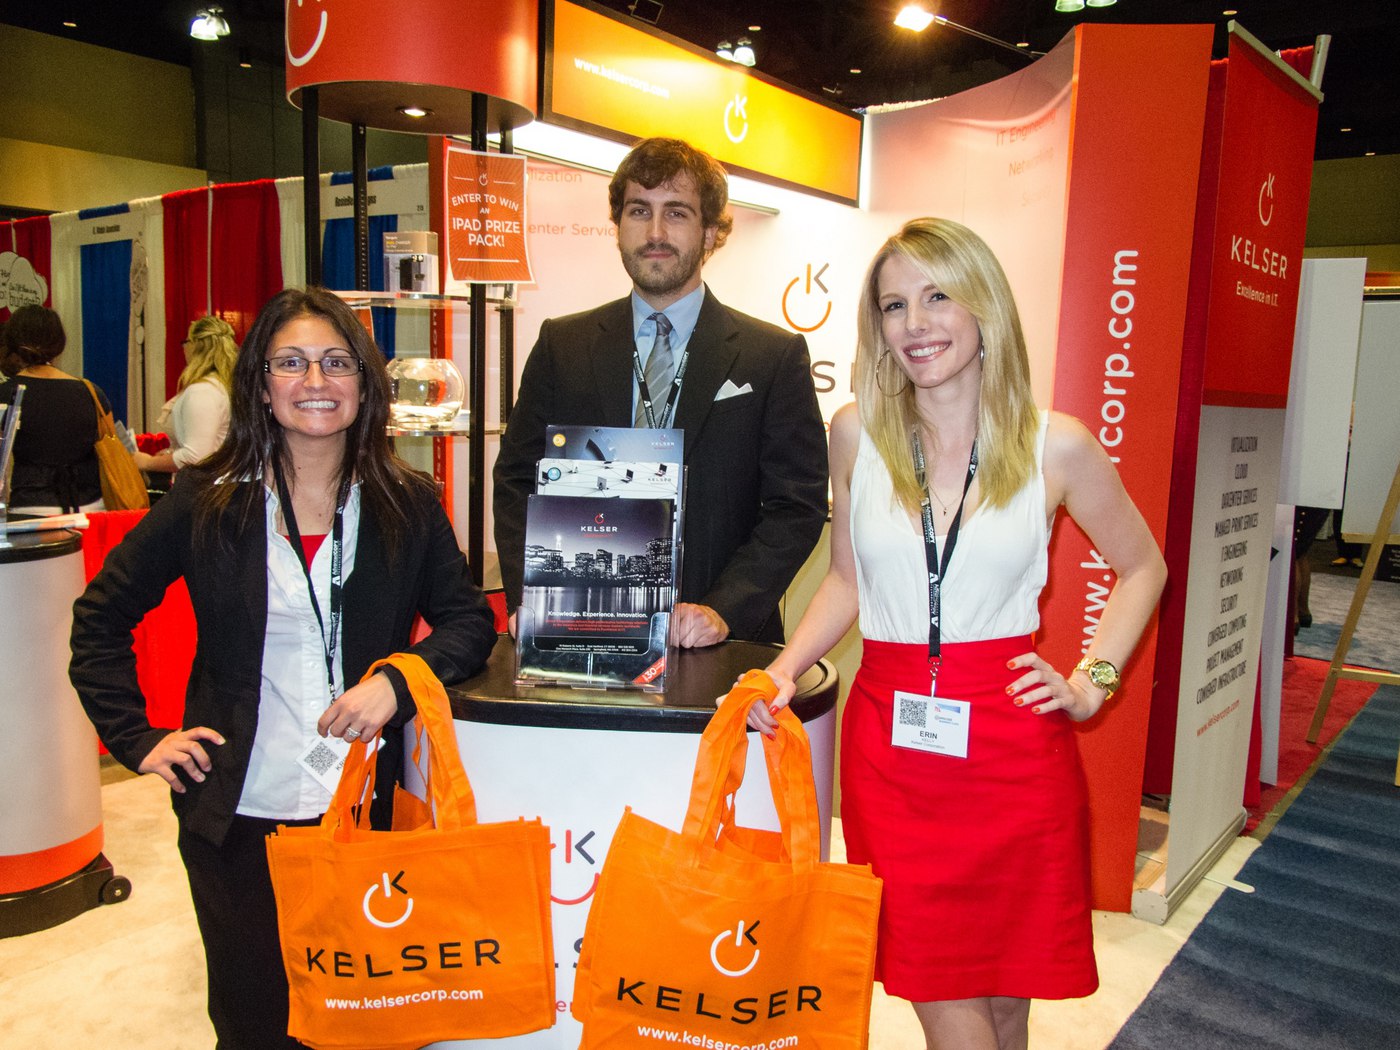 Kelser Wins “Best Booth” at the 2012 CT Business Expo